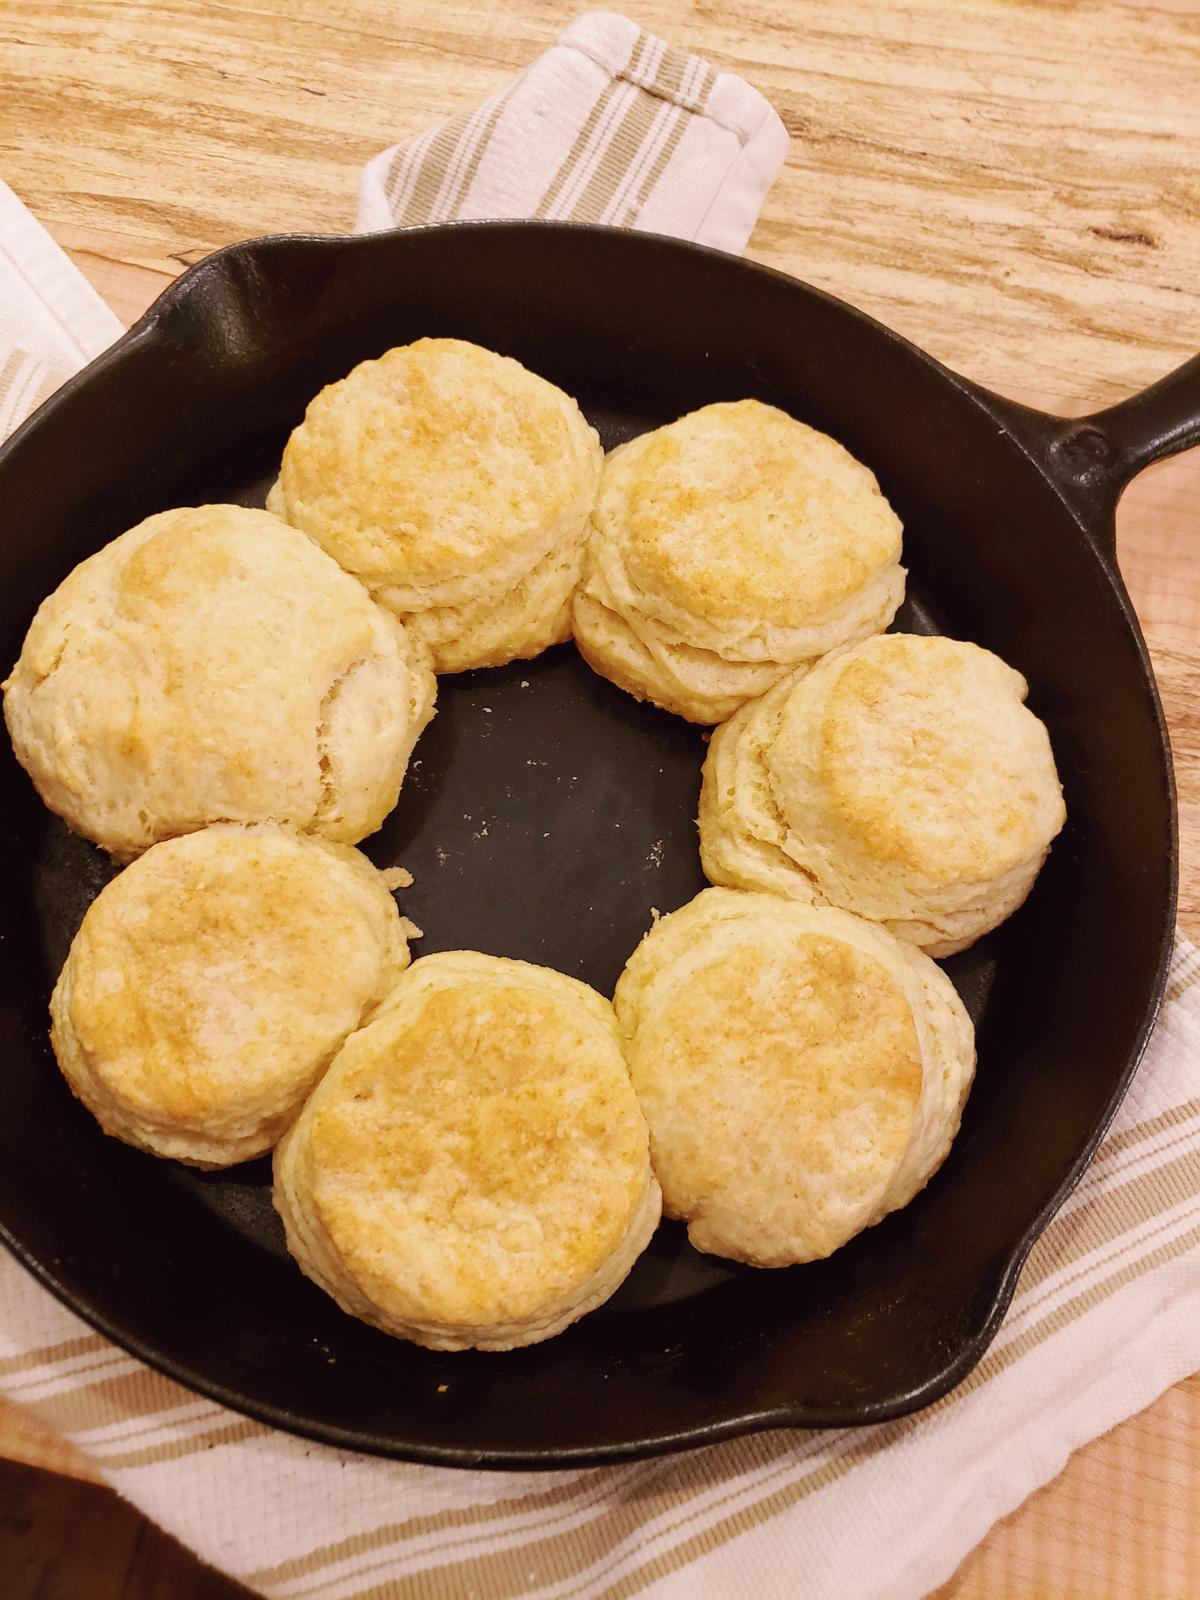 Mom's flaky buttermilk biscuits are the next best thing to Grandma's. (Courtesy of Melissa K. Norris)